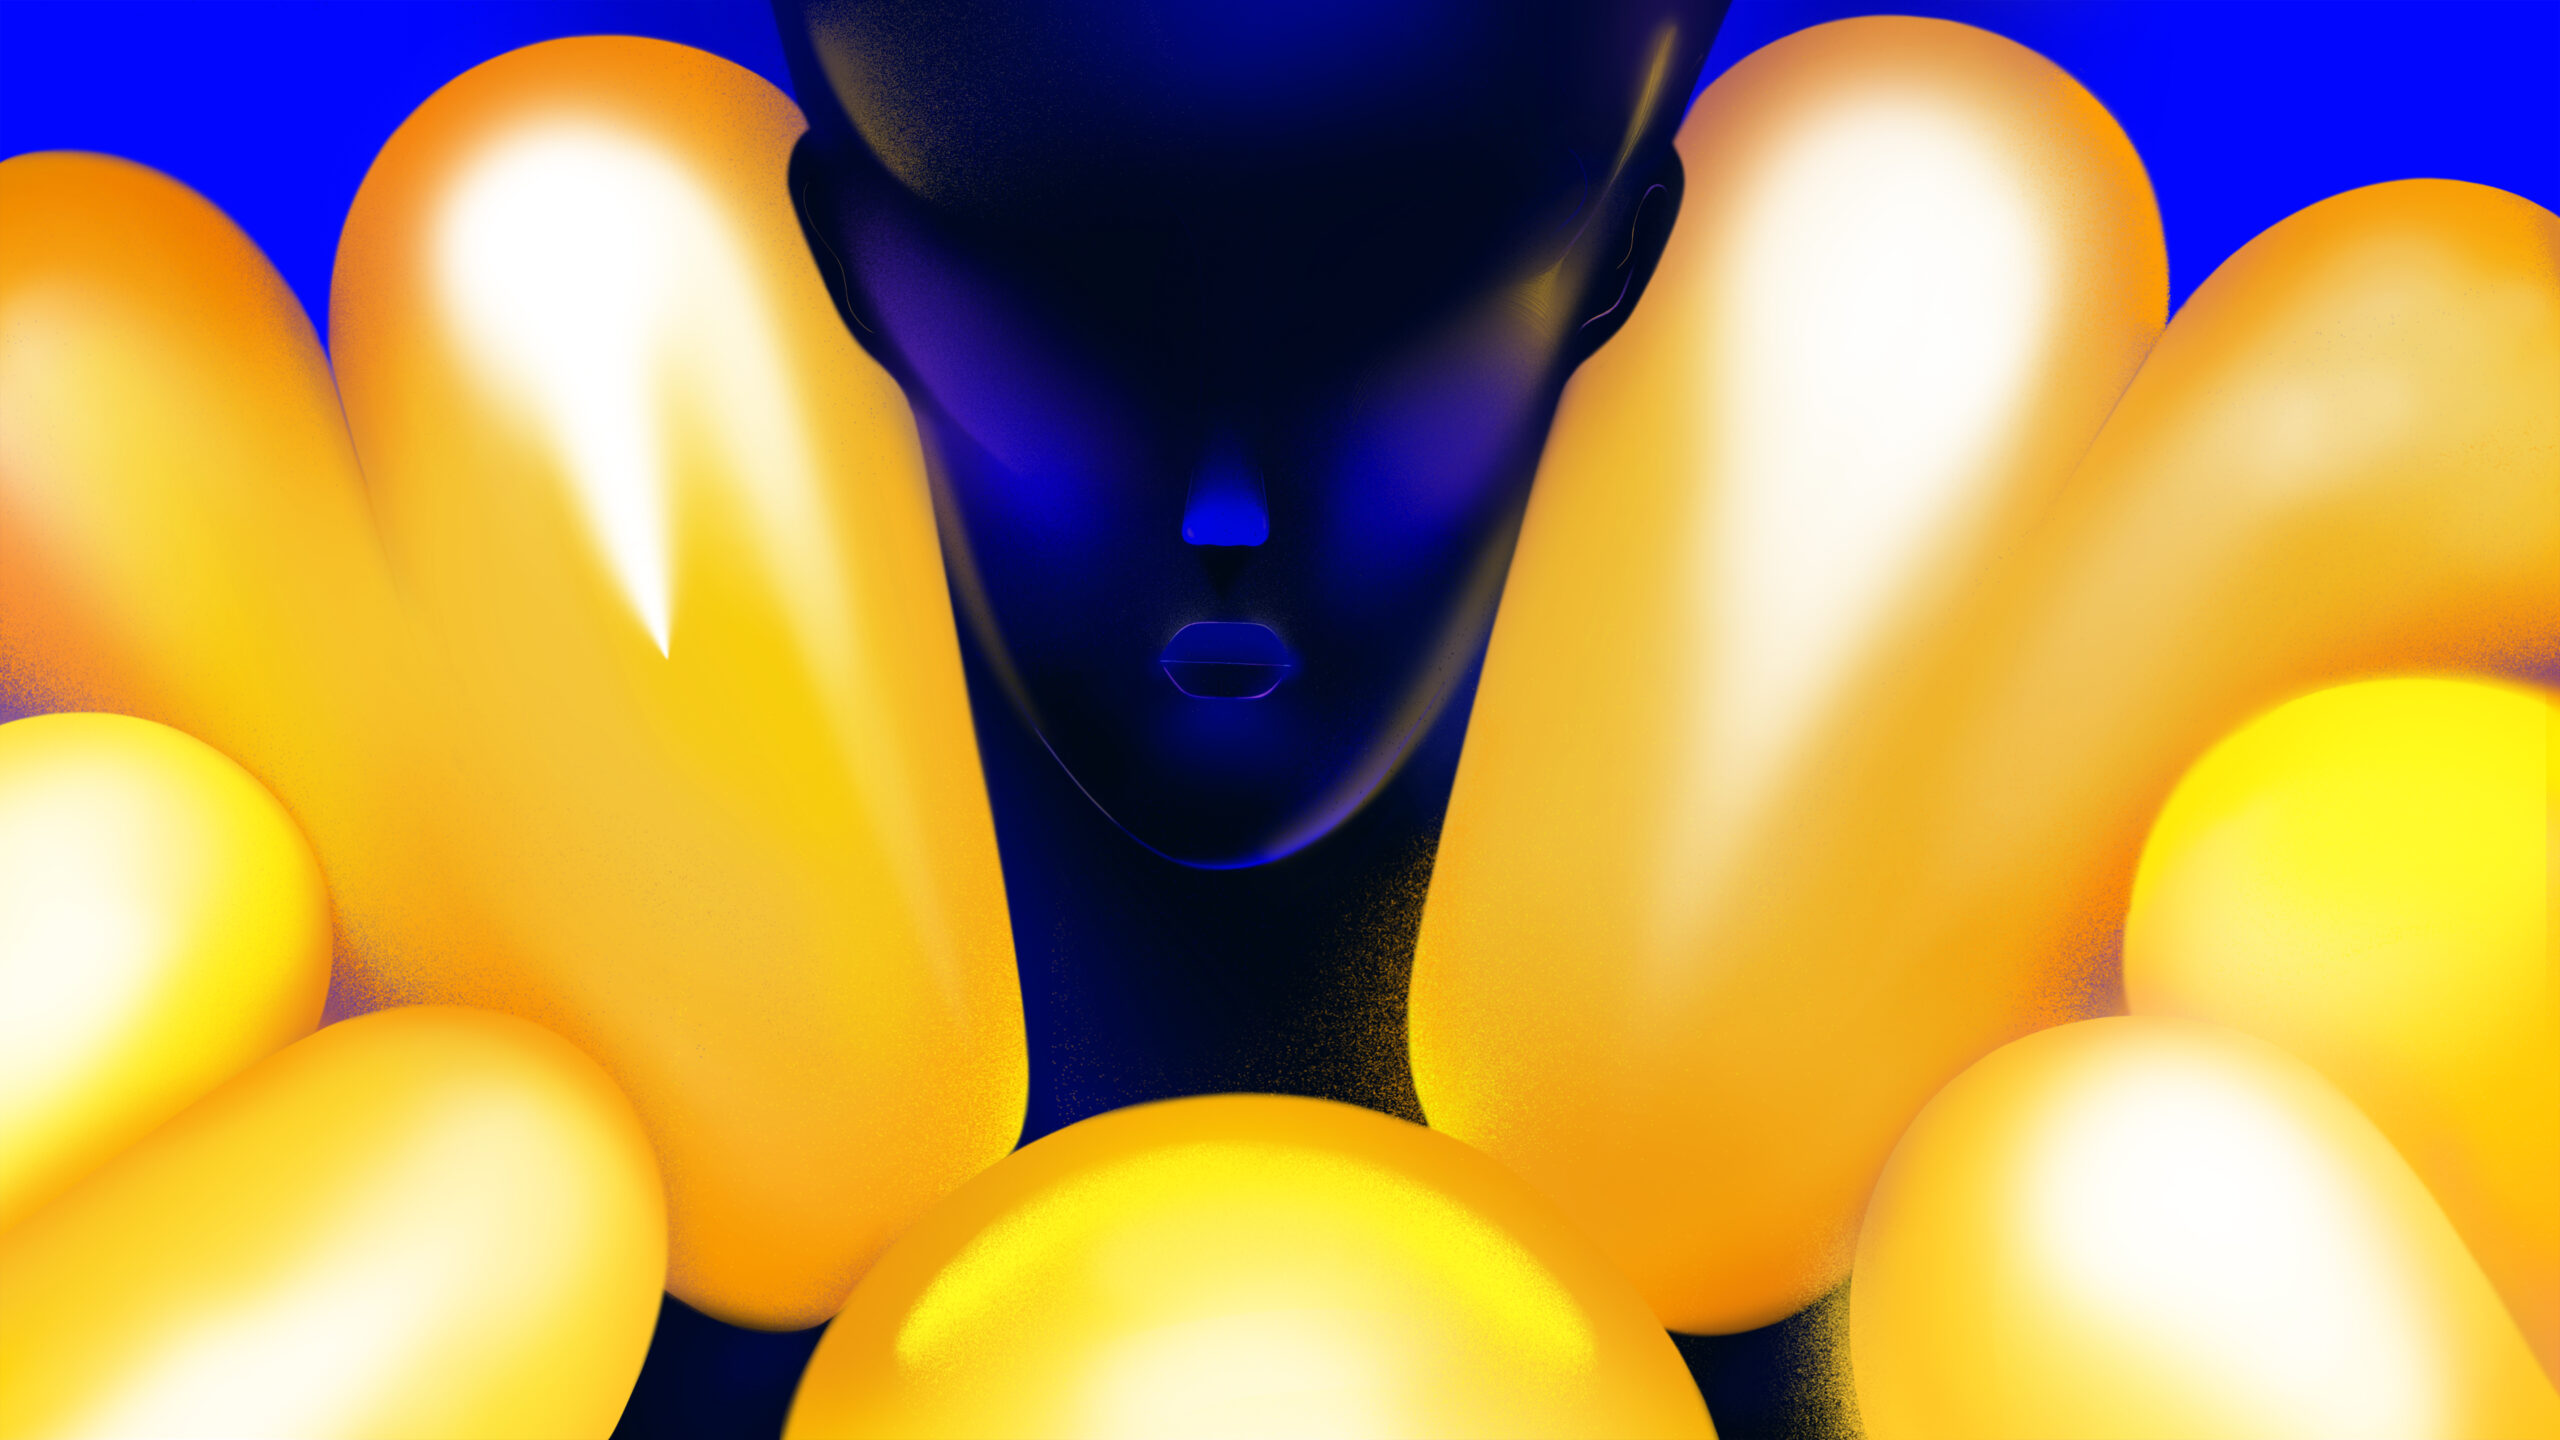 A digital painting of a blue-black face in amongst abstract yellow shapes - Debora Cruchon Pacific 231